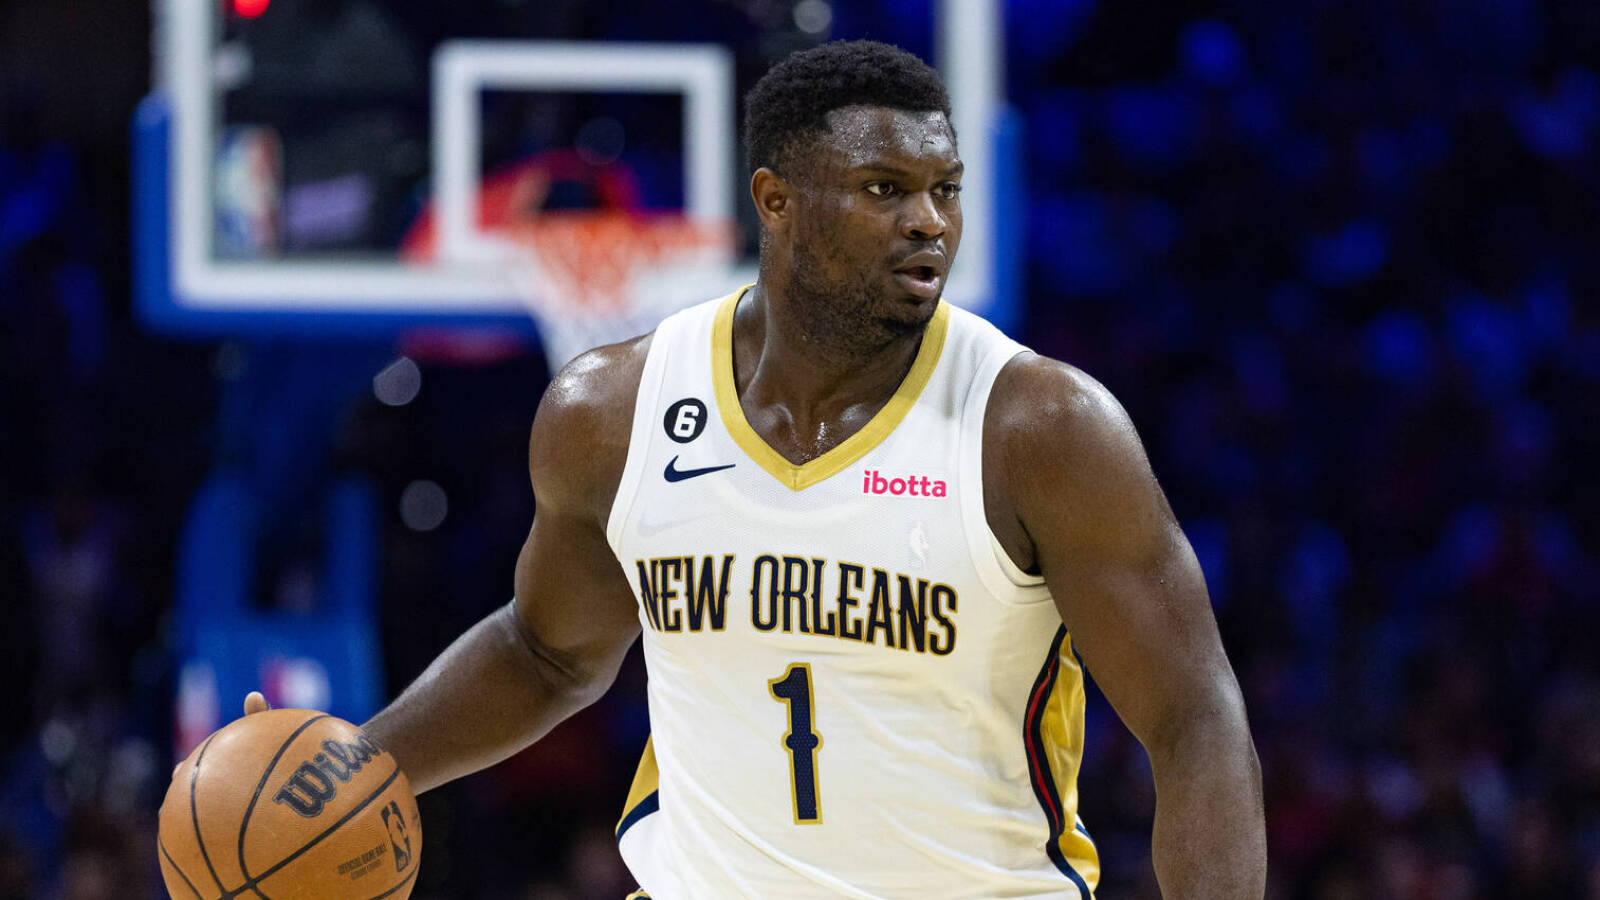 Zion Williamson: Three takeaways from Pelicans media day